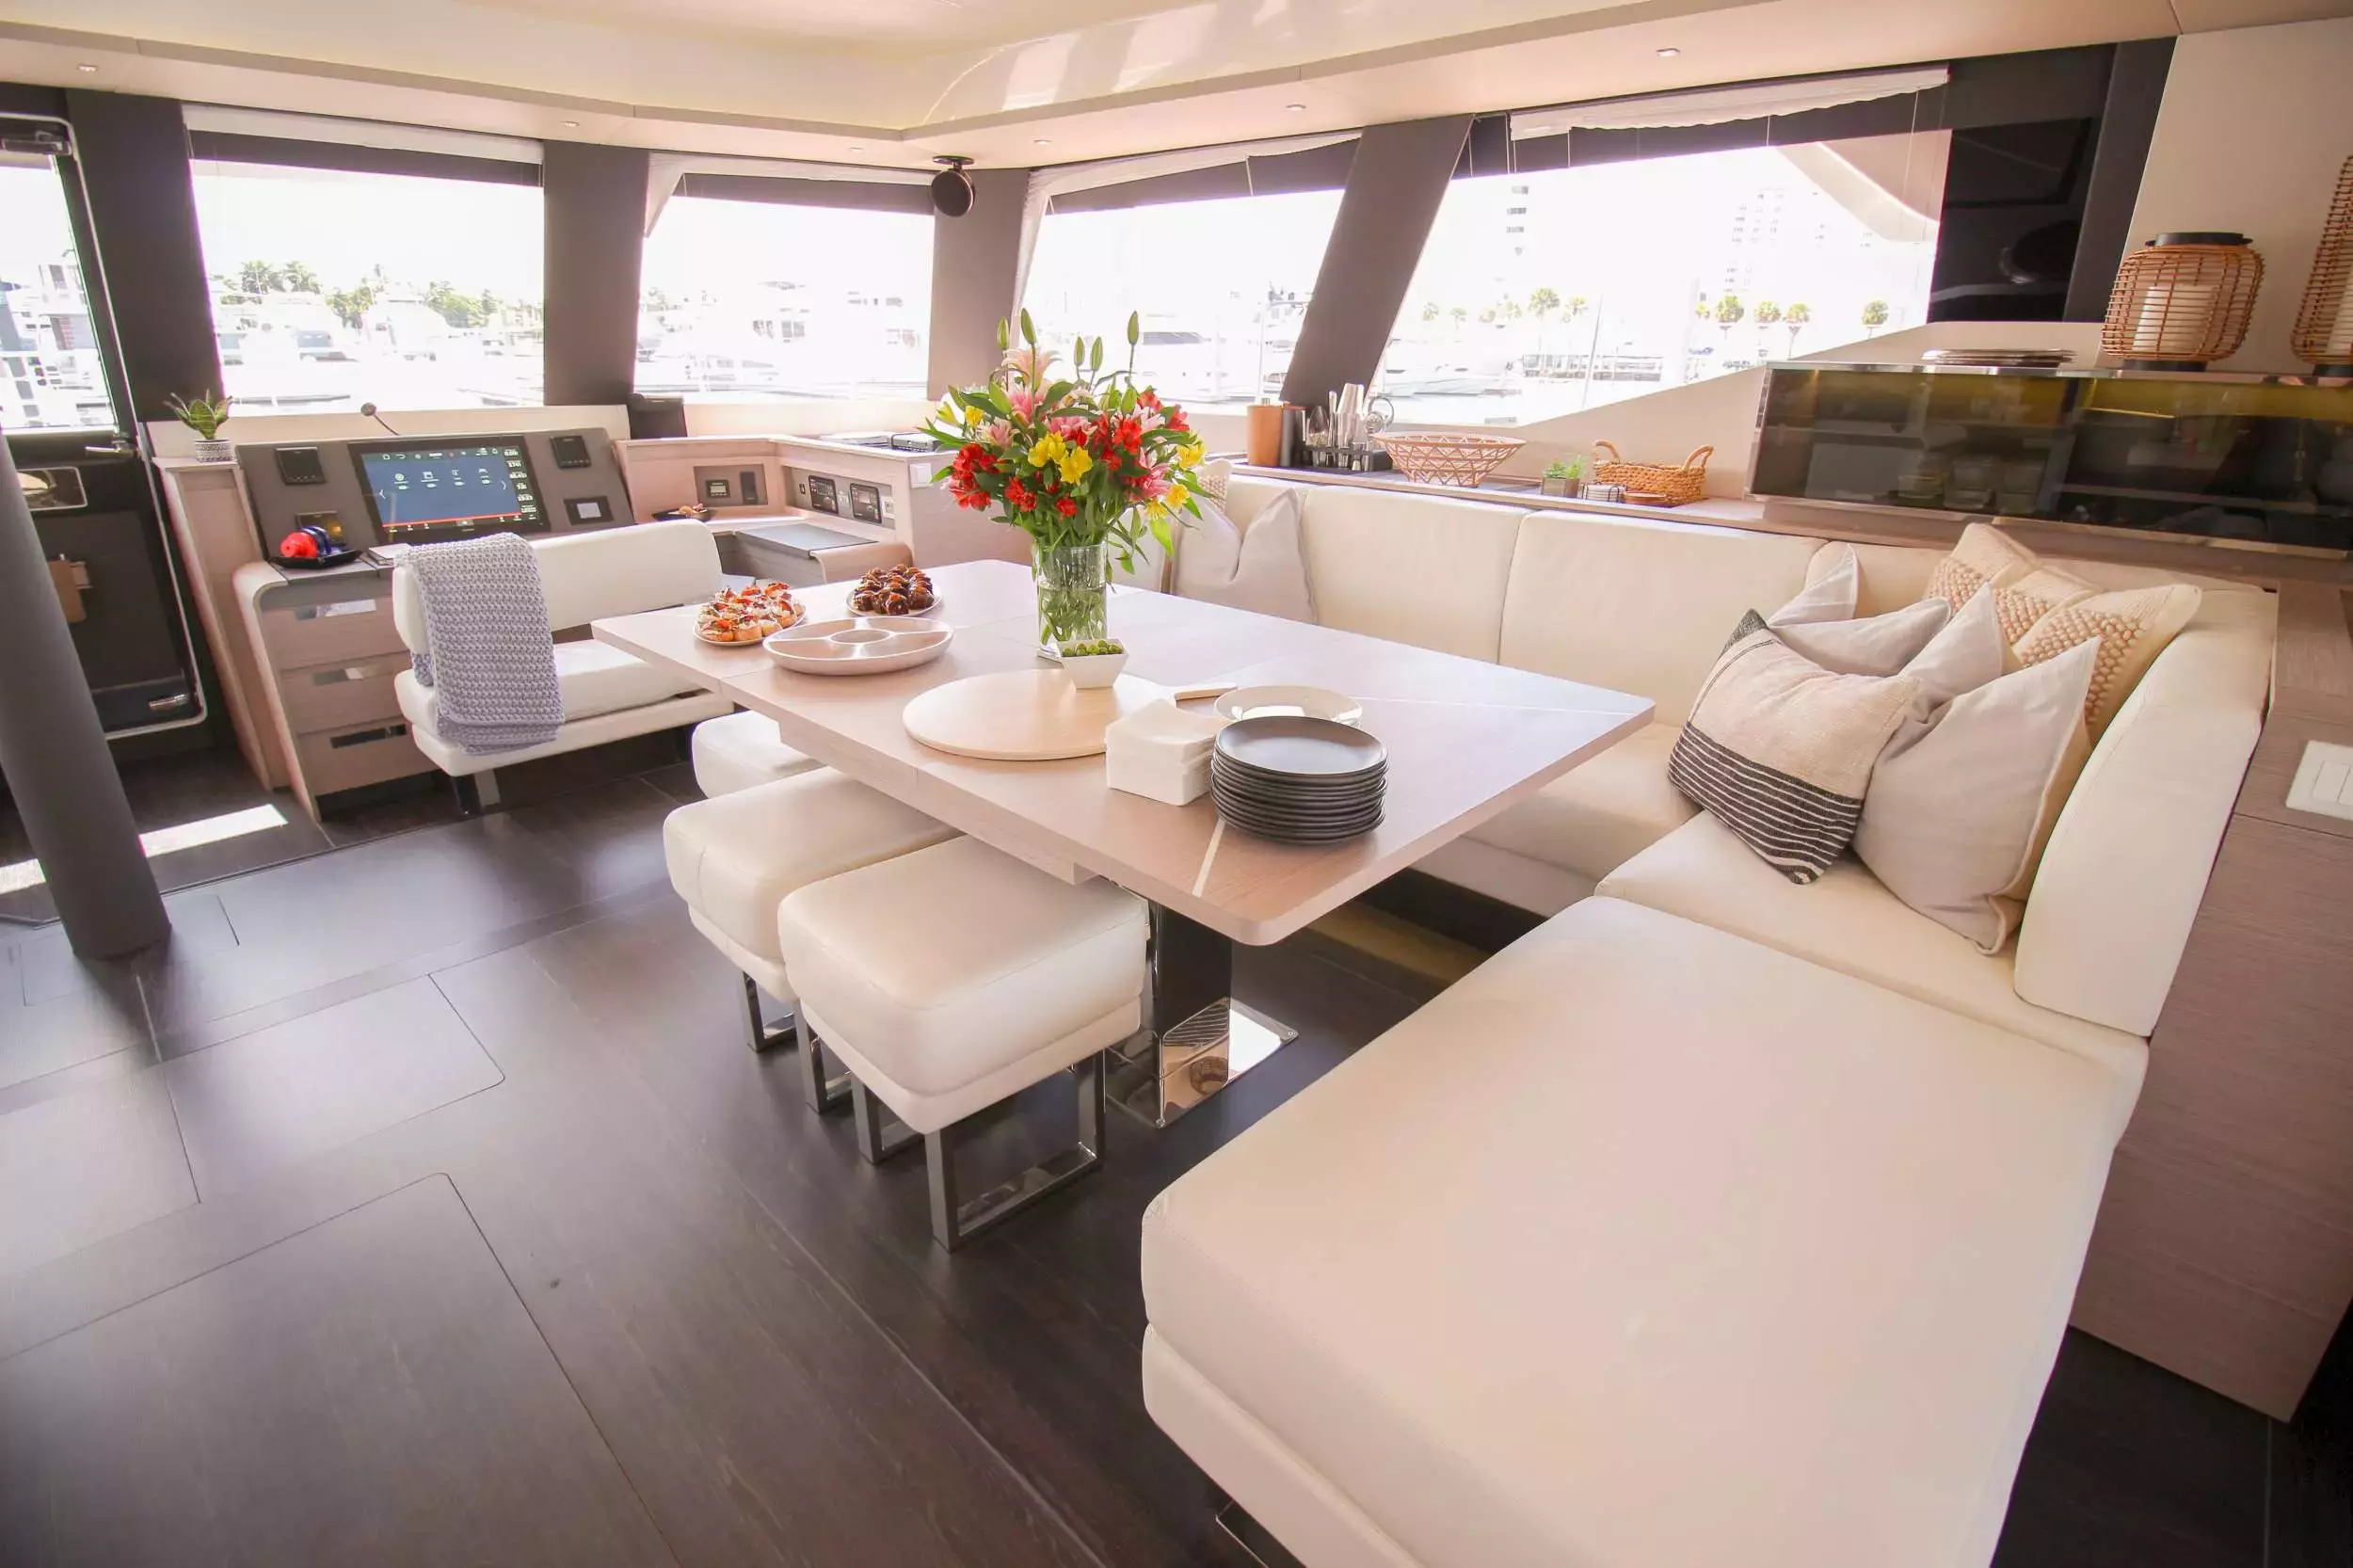 Princess Mila by Fountaine Pajot - Special Offer for a private Power Catamaran Rental in Harbour Island with a crew